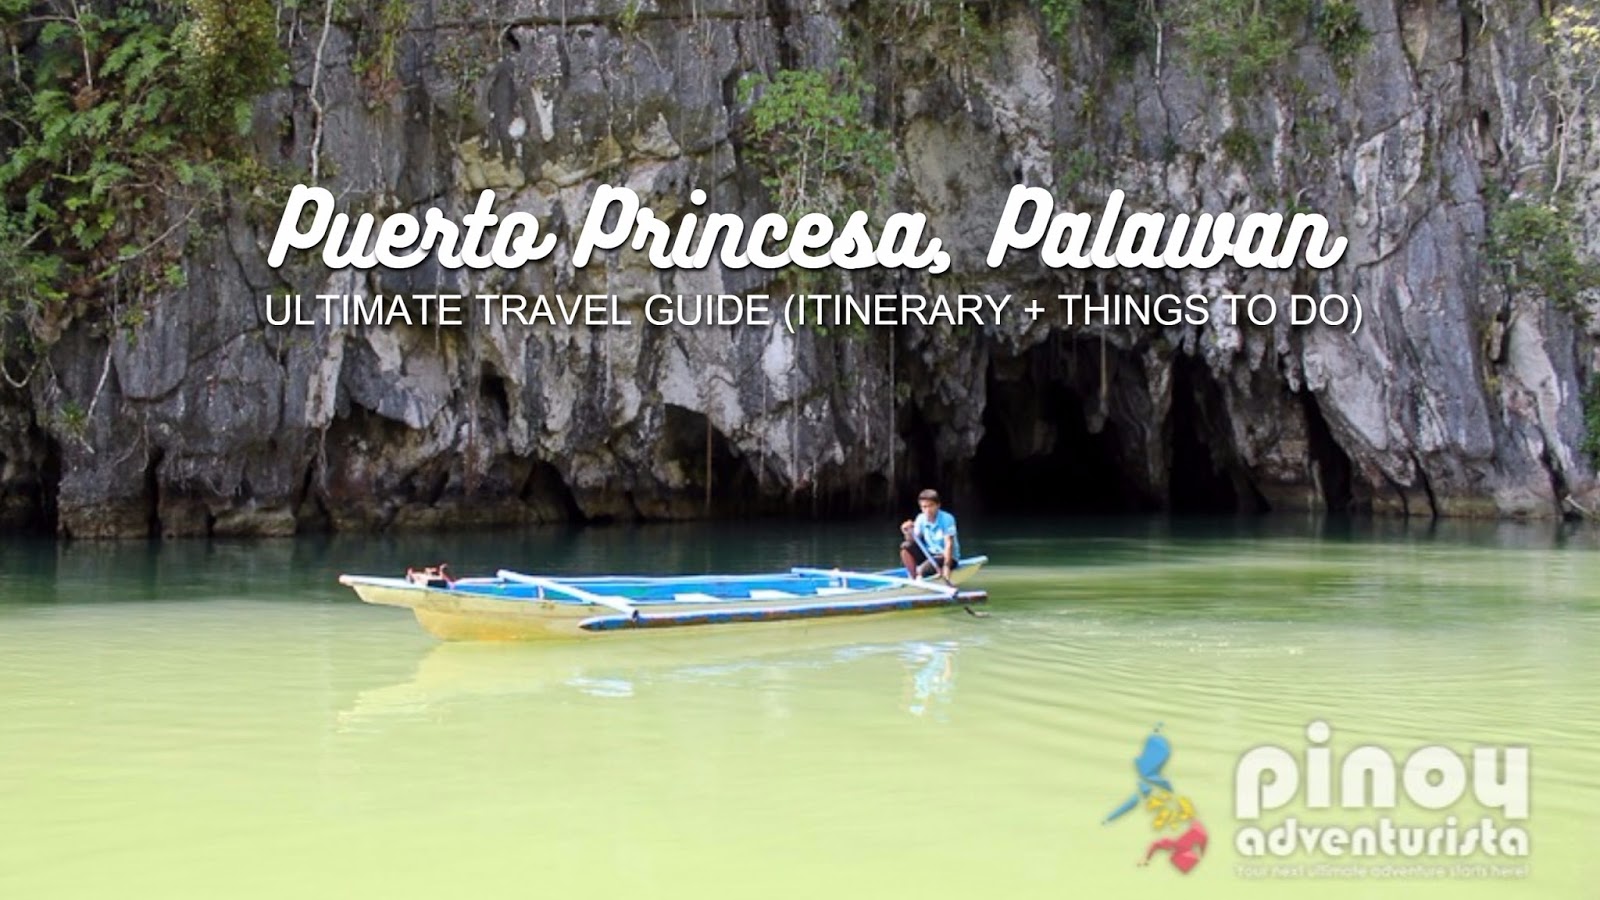 PALAWAN ITINERARY: Things to Do in Puerto Princesa, Spots and Places to Visit (Travel Guide 2023 for | Blogs, Travel Guides, Things to Do, Tourist Spots, DIY Itinerary, Hotel